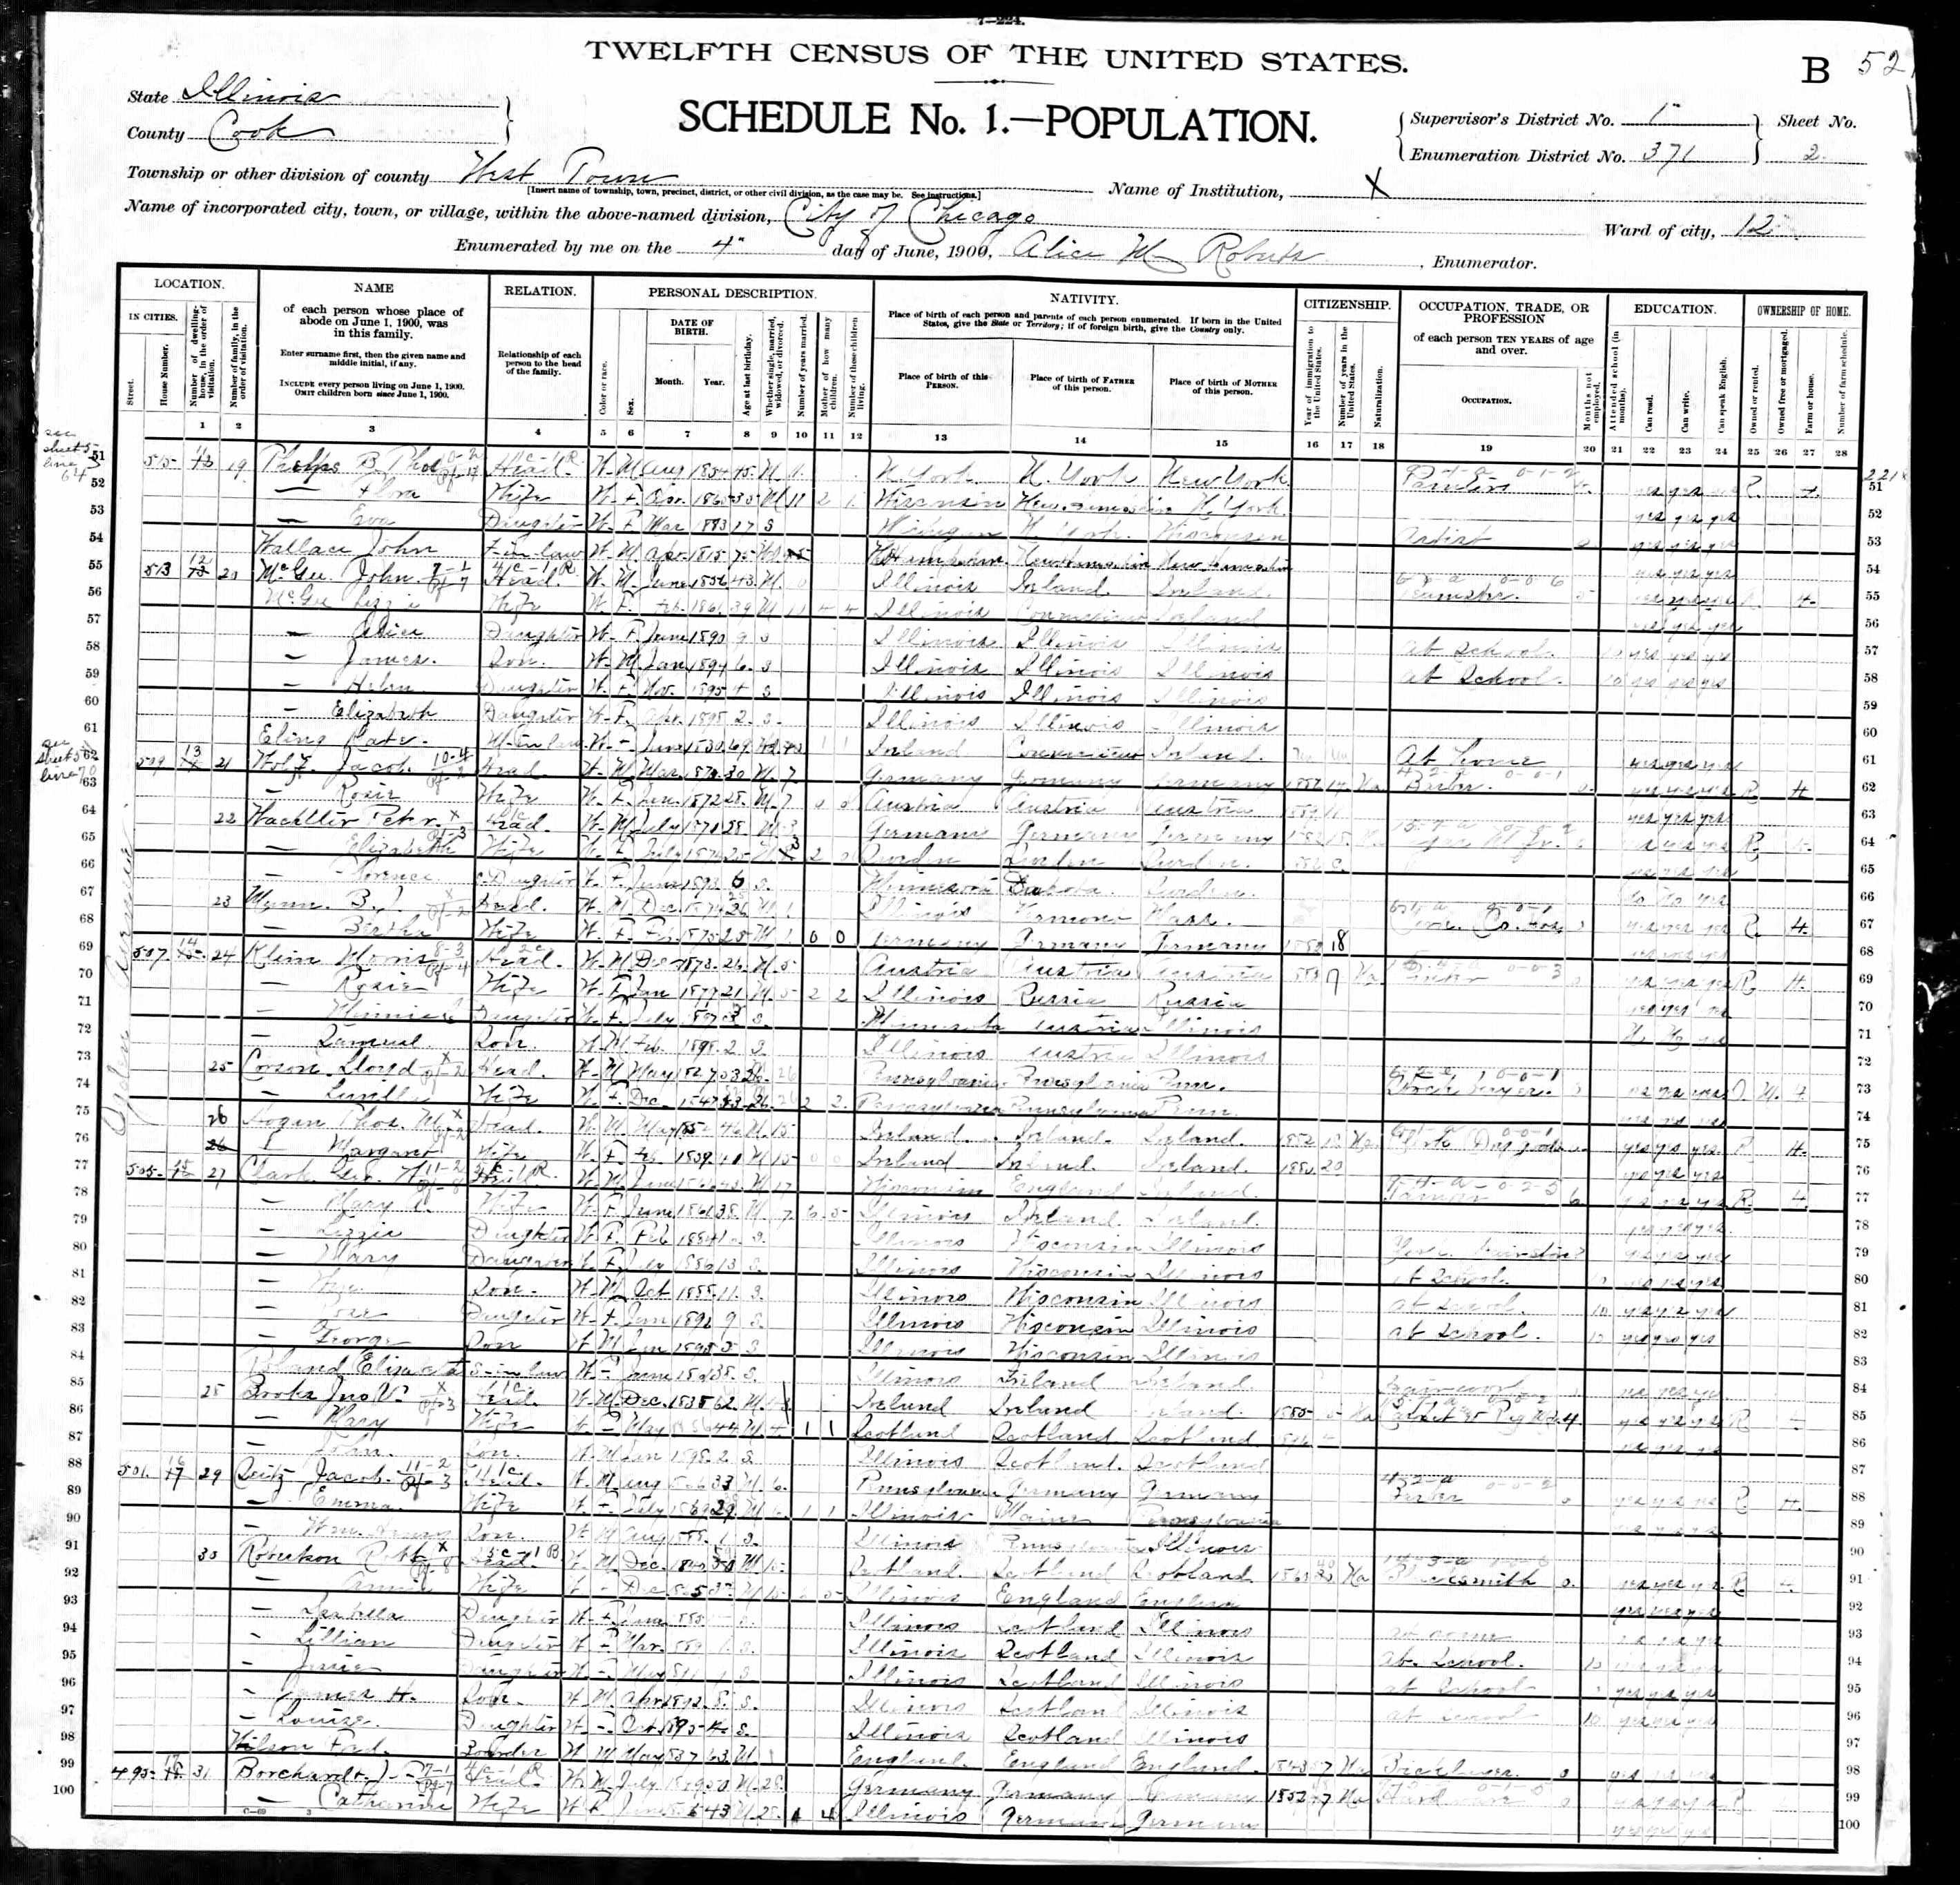 Mary (Donald) Brooks, 1900 Cook County, Illinois, census, with husband John W. Brooks